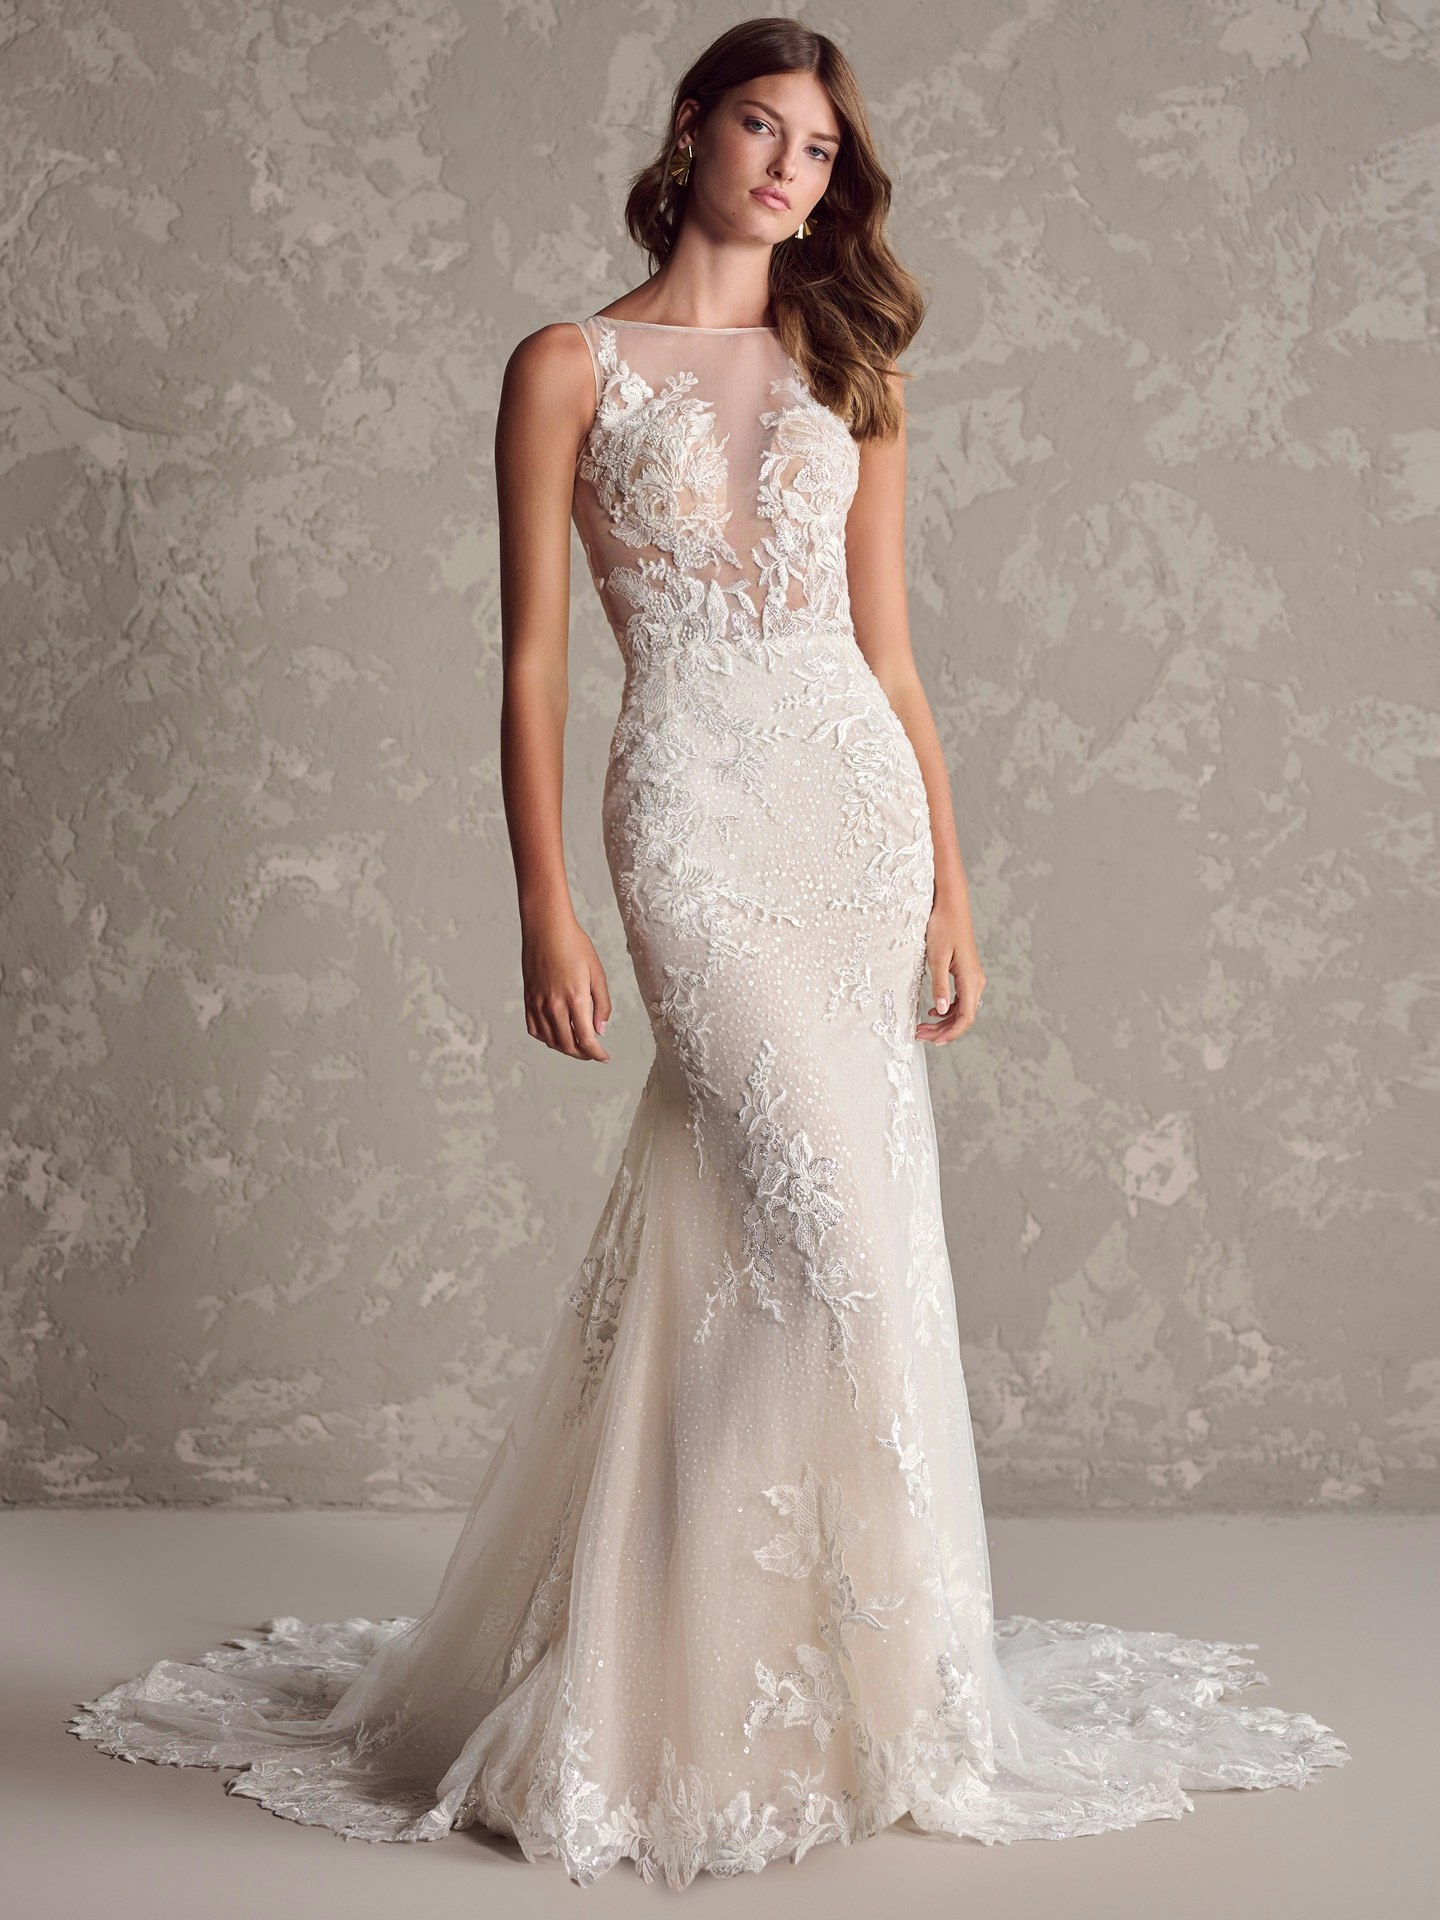 Elegant Lace Illusion Sleeve Floor-length Bridal Gown with Cathedral Train  - UCenter Dress